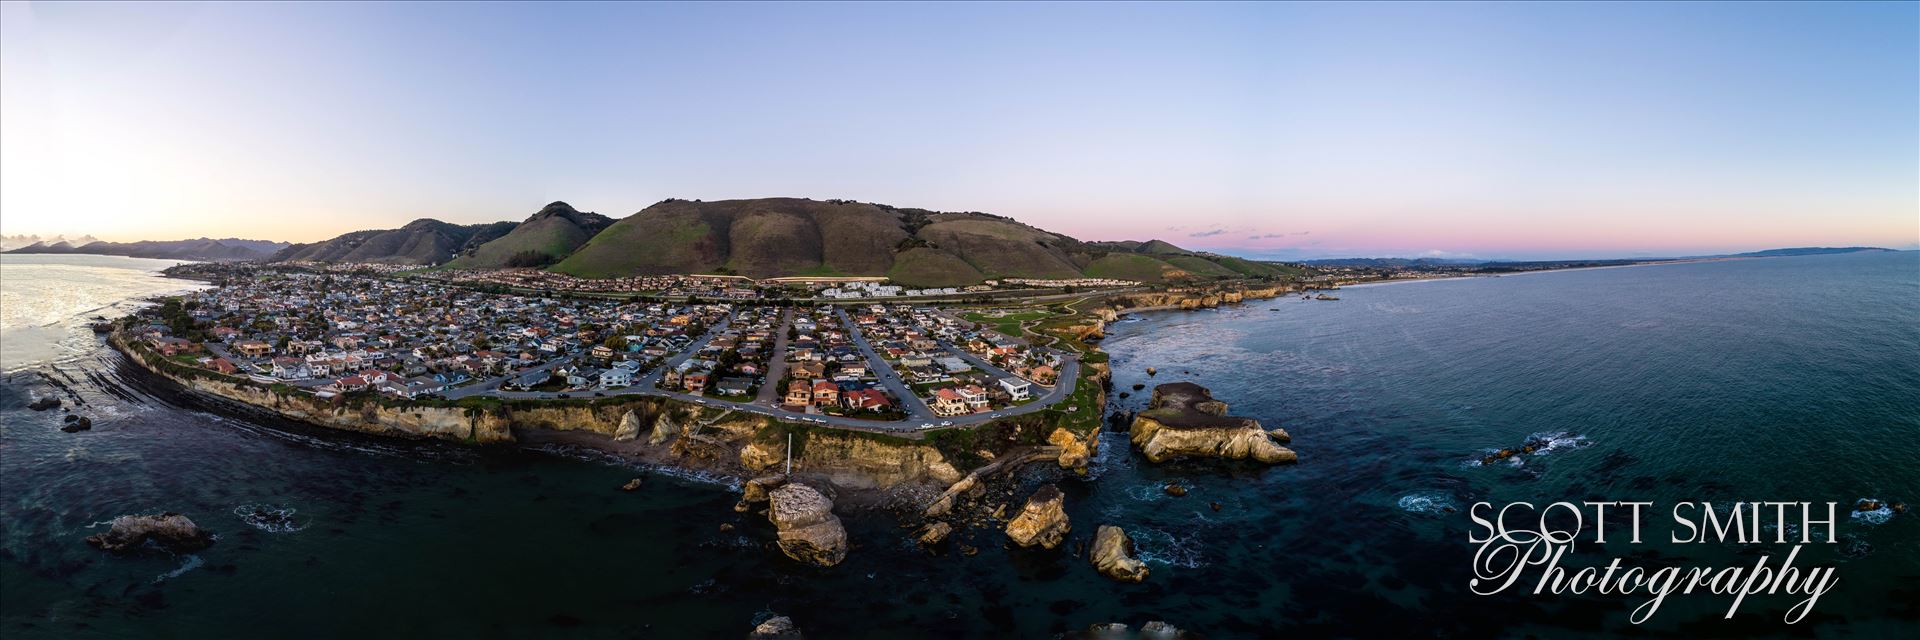 Aerial of Shell Beach, California - Near sunset, at Shell Beach, California.  Composite of 21 high res images from a Phantom 4 Pro.  This is a super high resolution image at over 16k by 4k pixels. by Scott Smith Photos